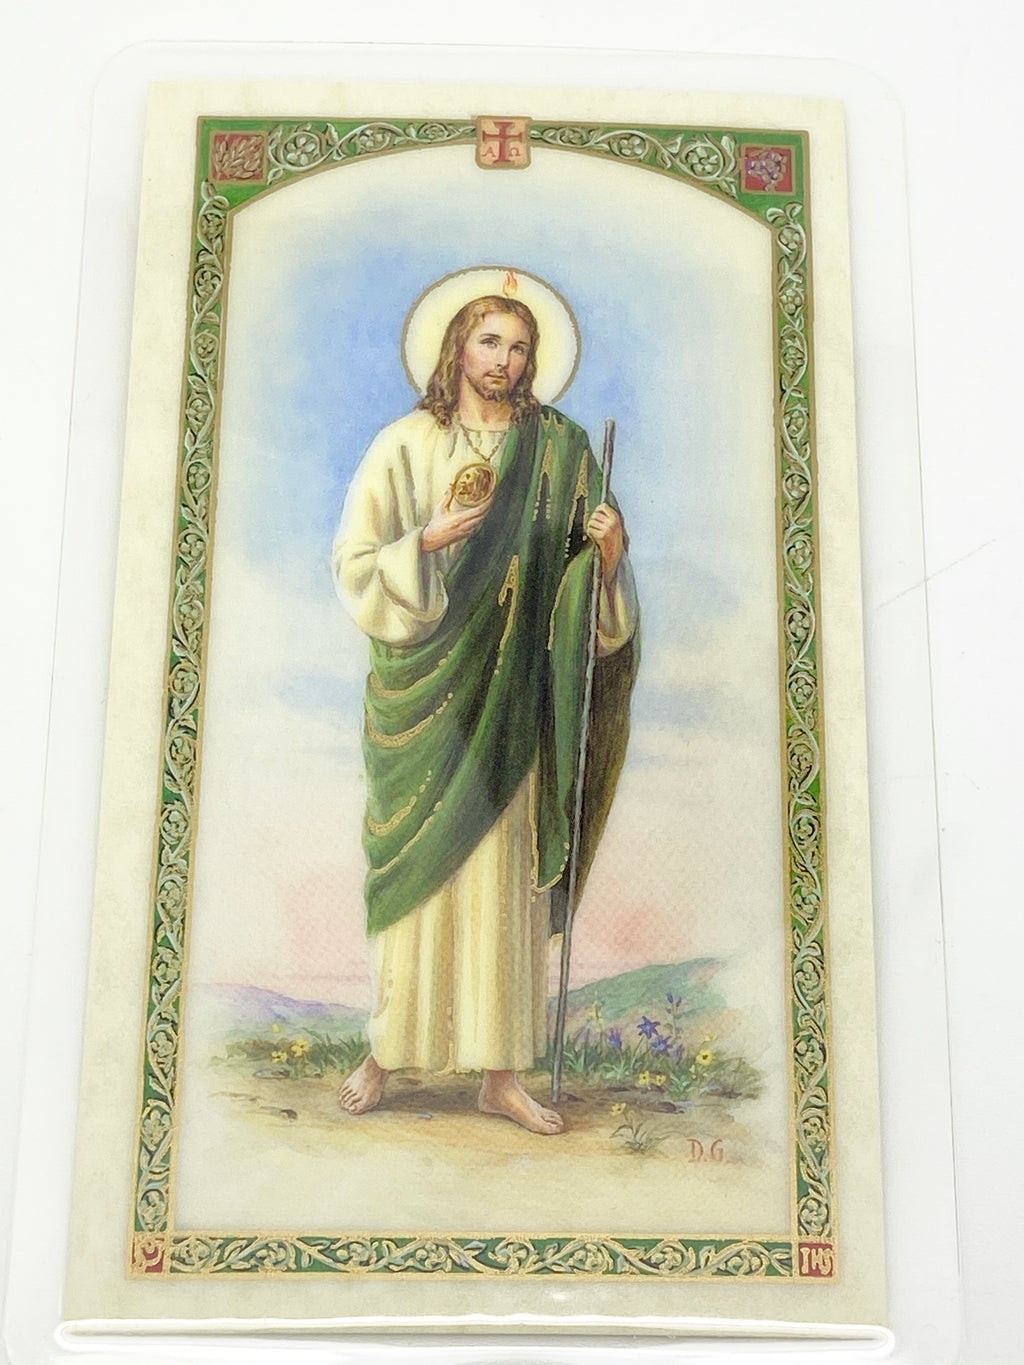 St. Jude "Don't Quit" Laminated Holy Card (Plastic Covered) - Unique Catholic Gifts